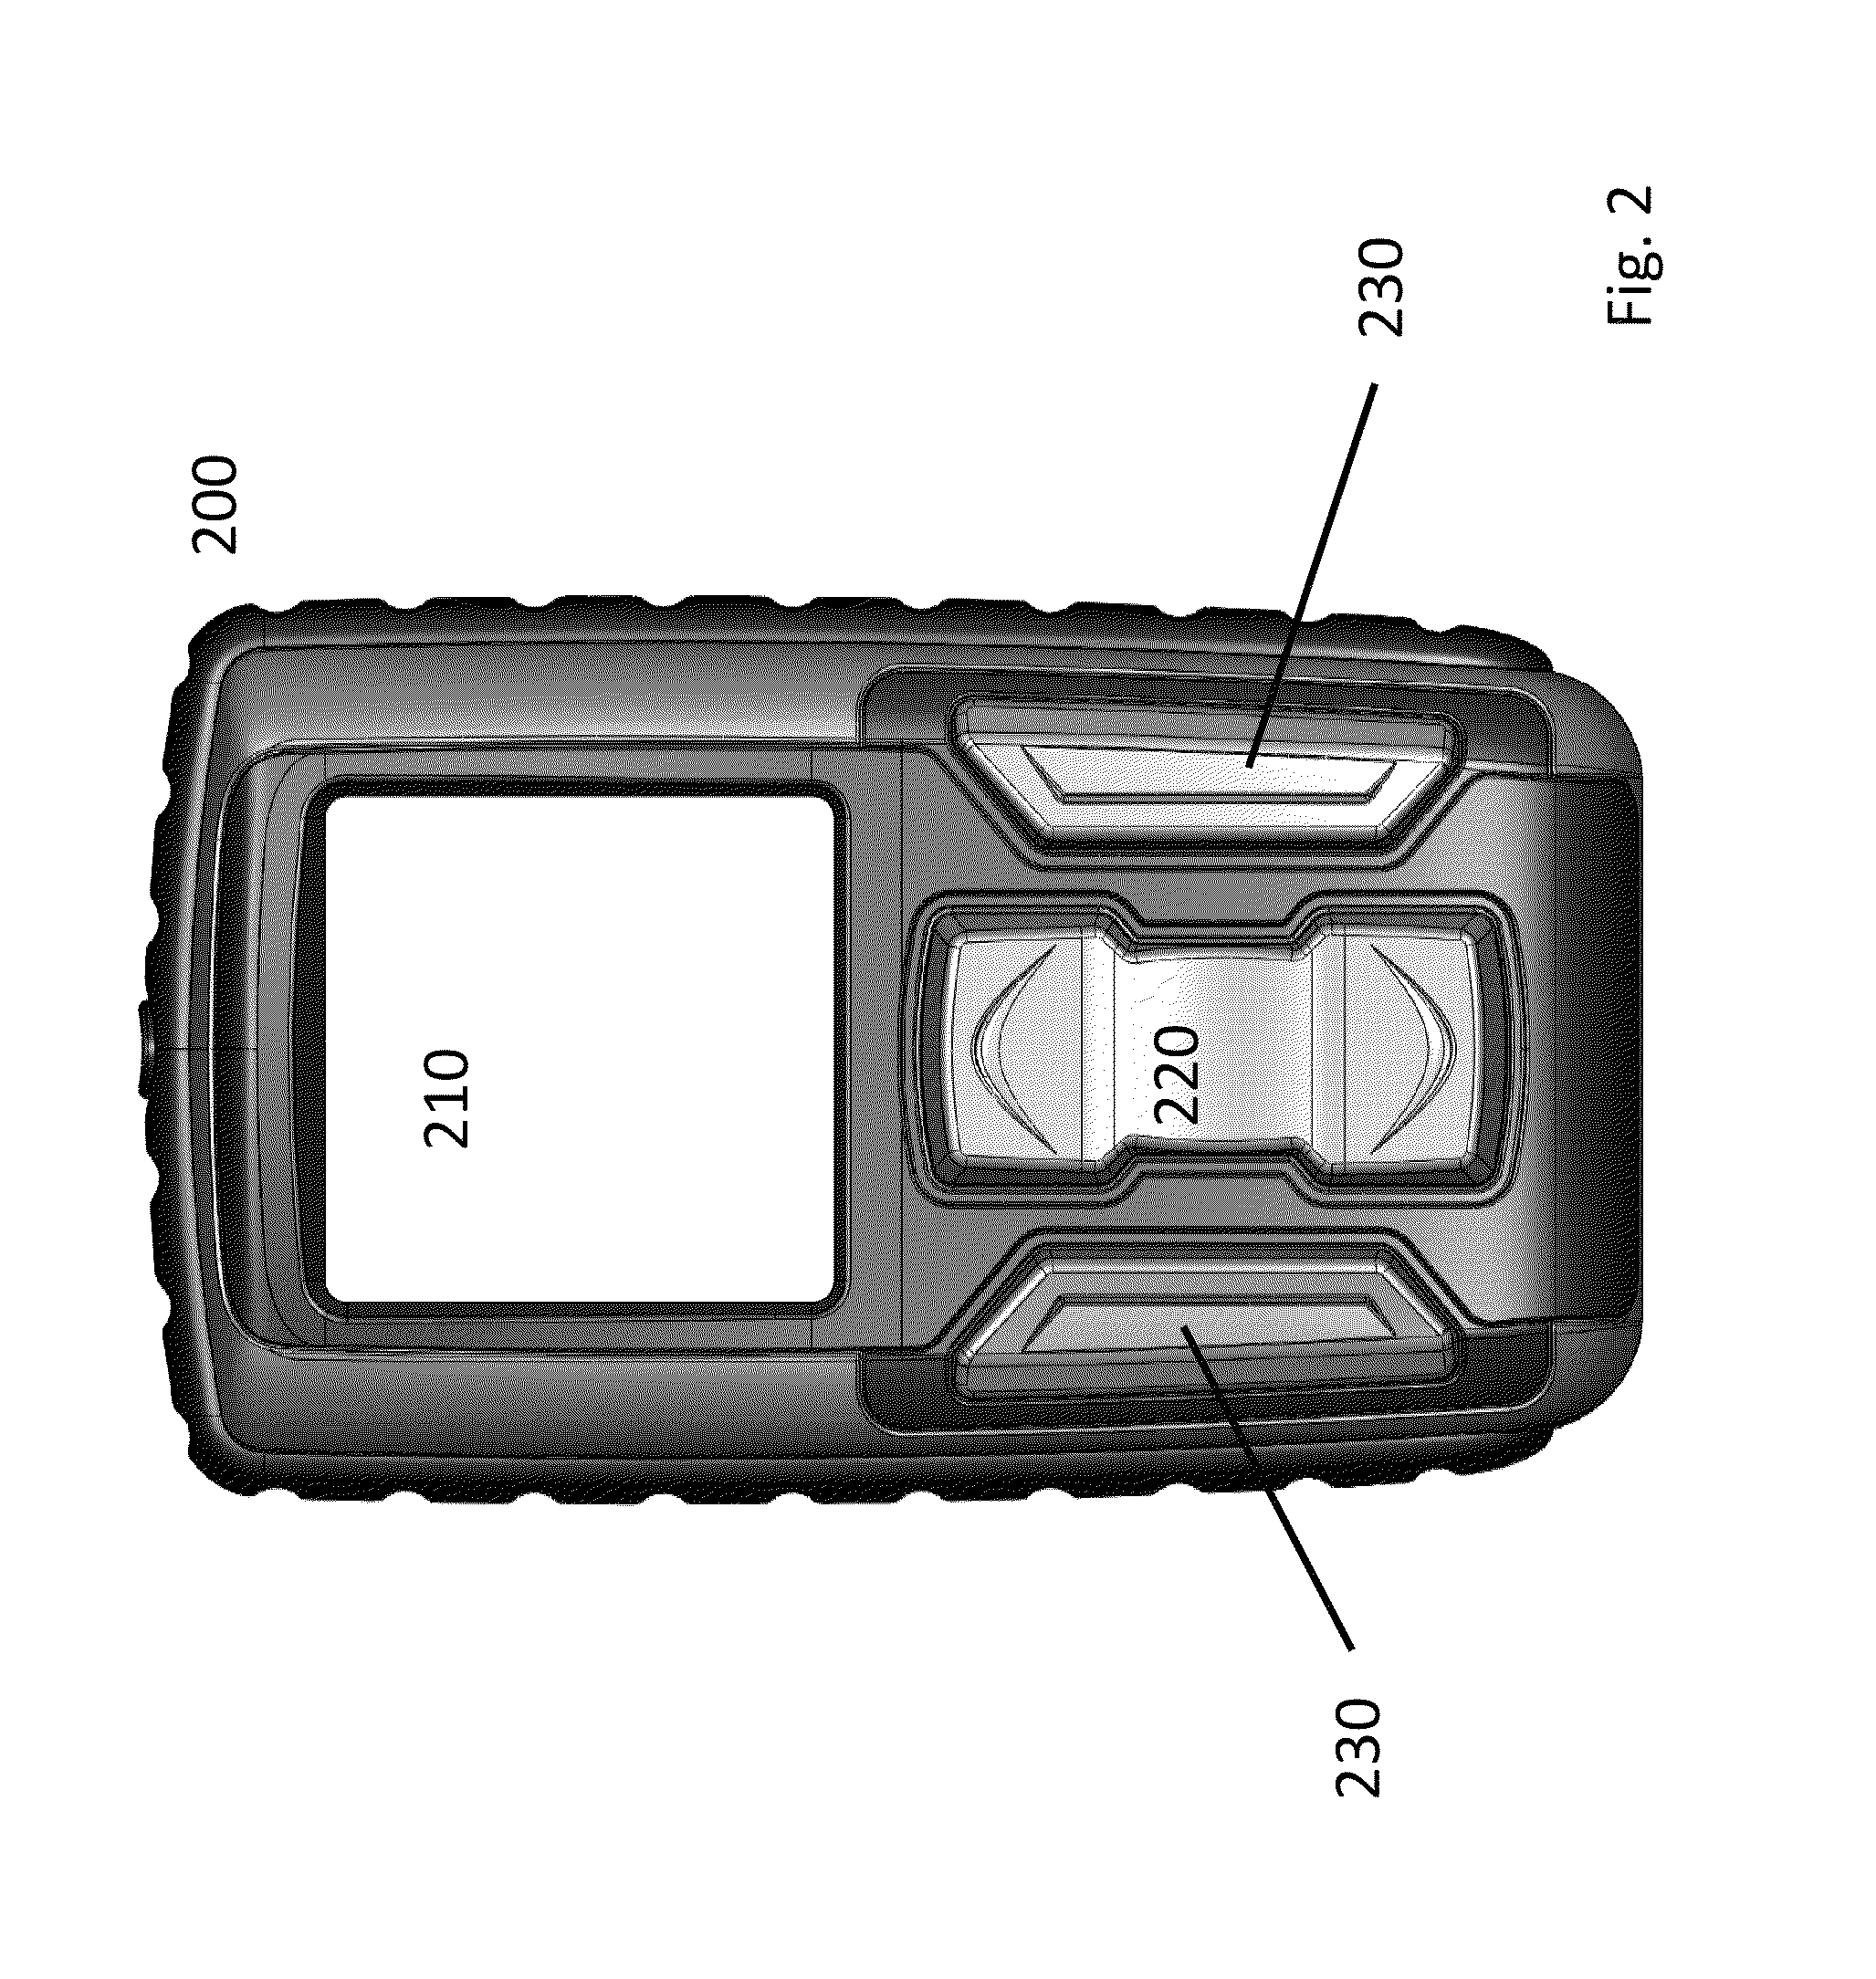 Role based system and device for command and control